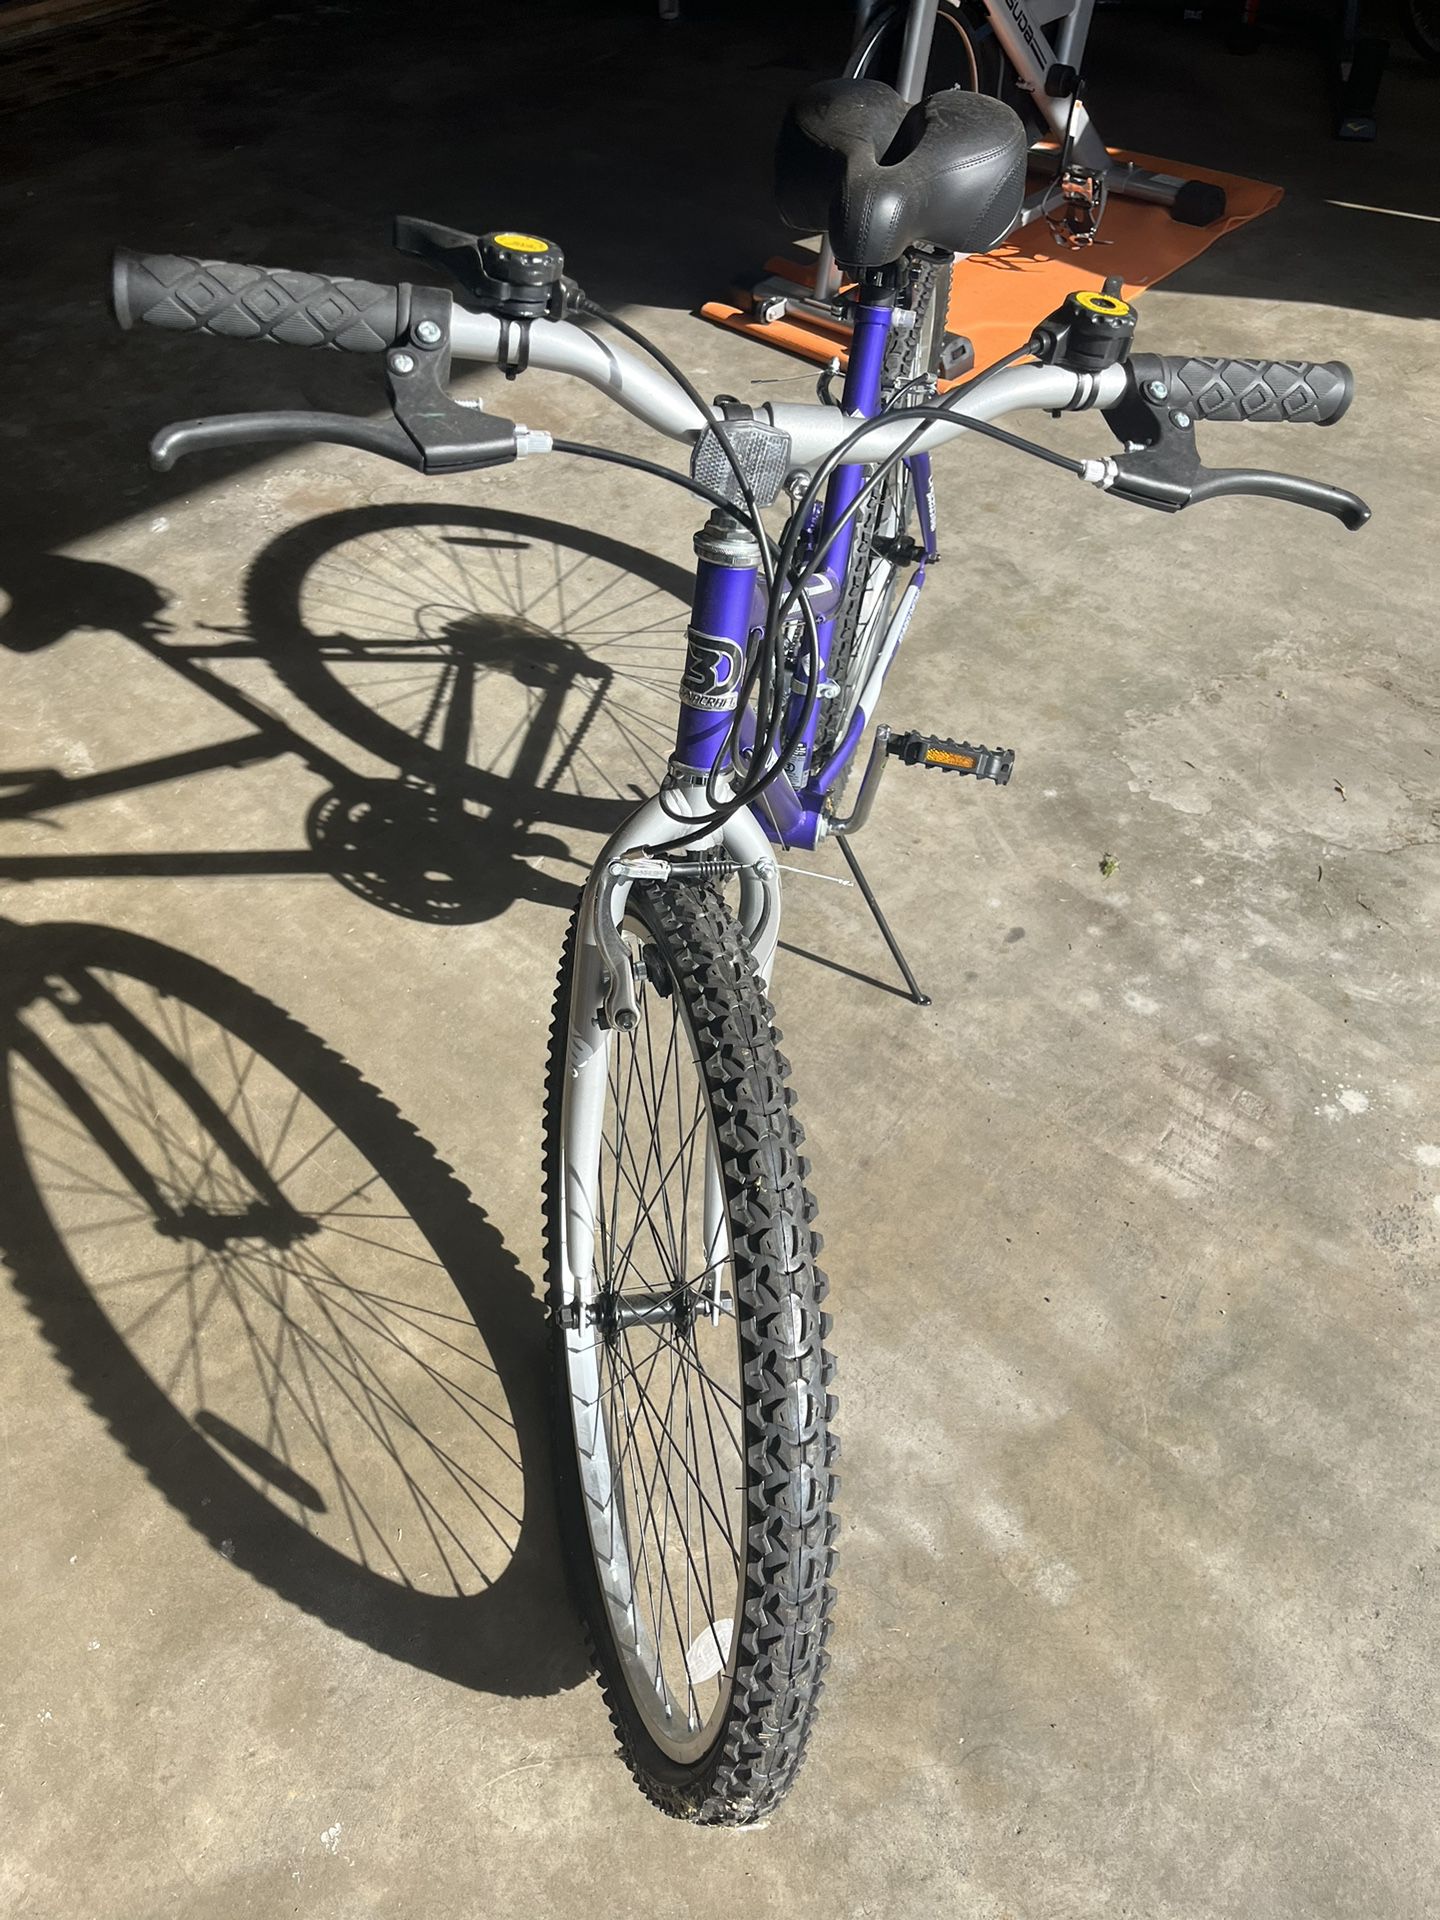 Brand New Purple Bike Just In Time For Summer!